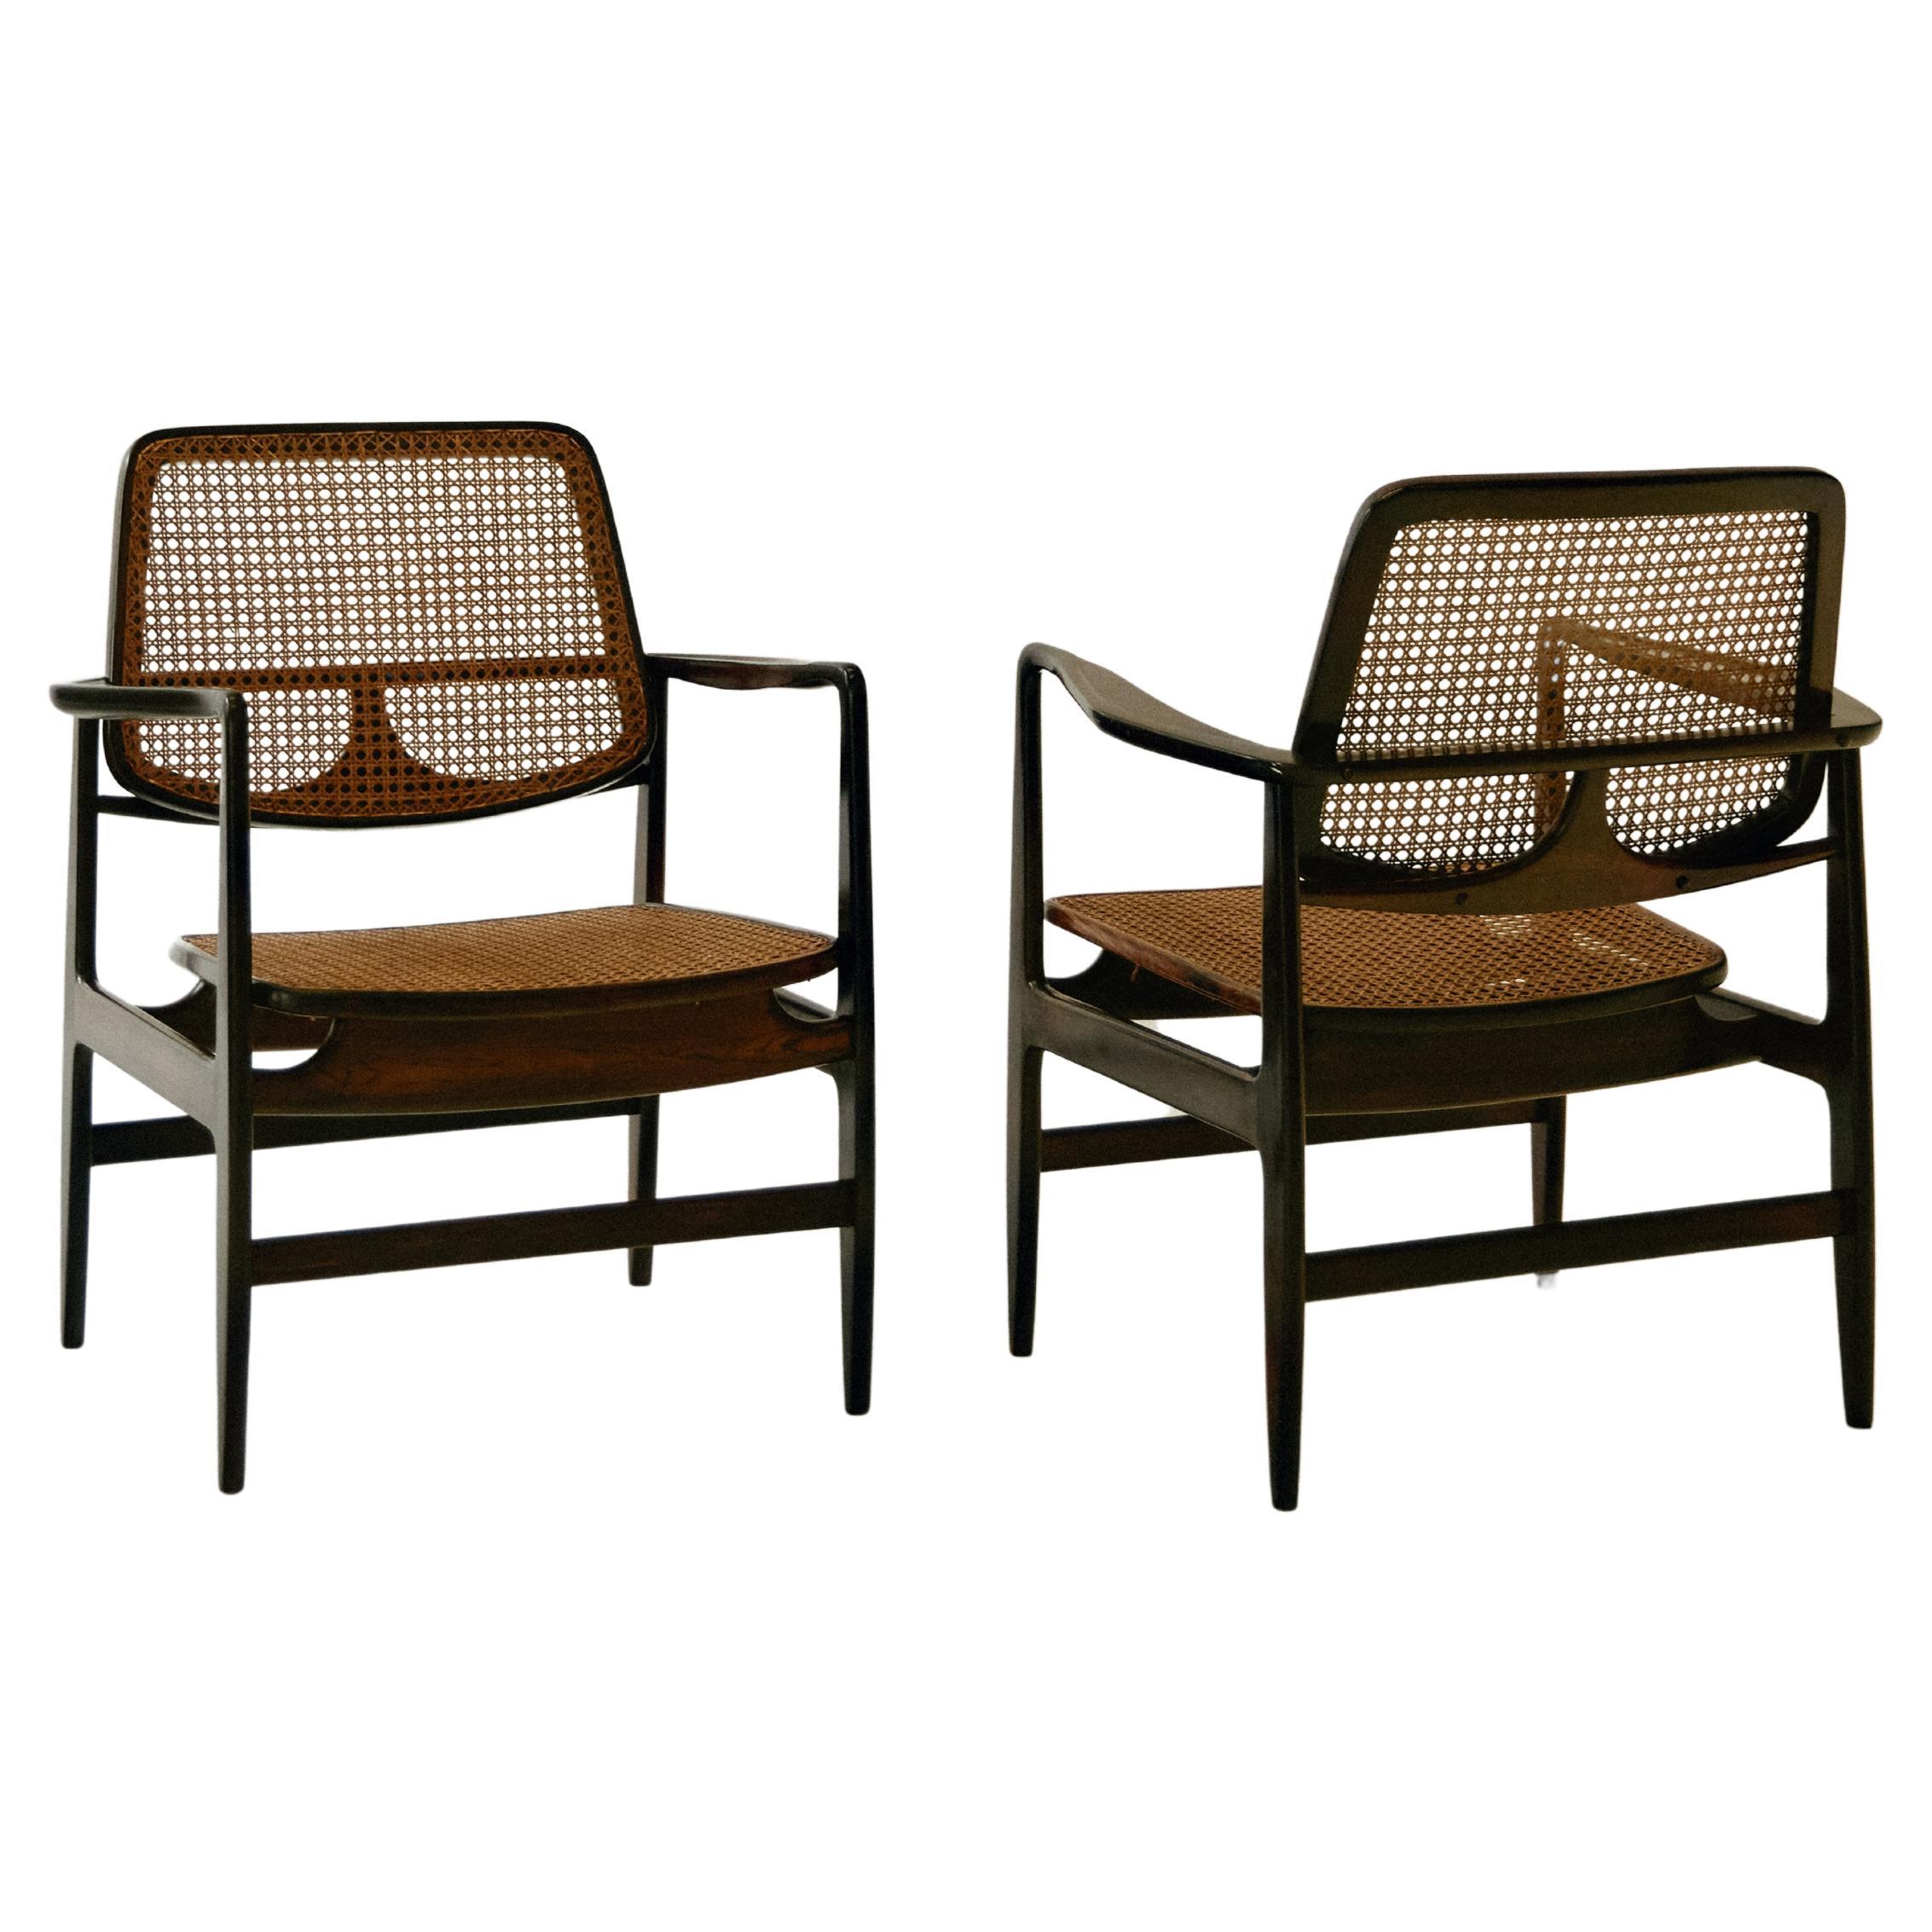 Pair of "Oscar" Armchairs by Sergio Rodrigues